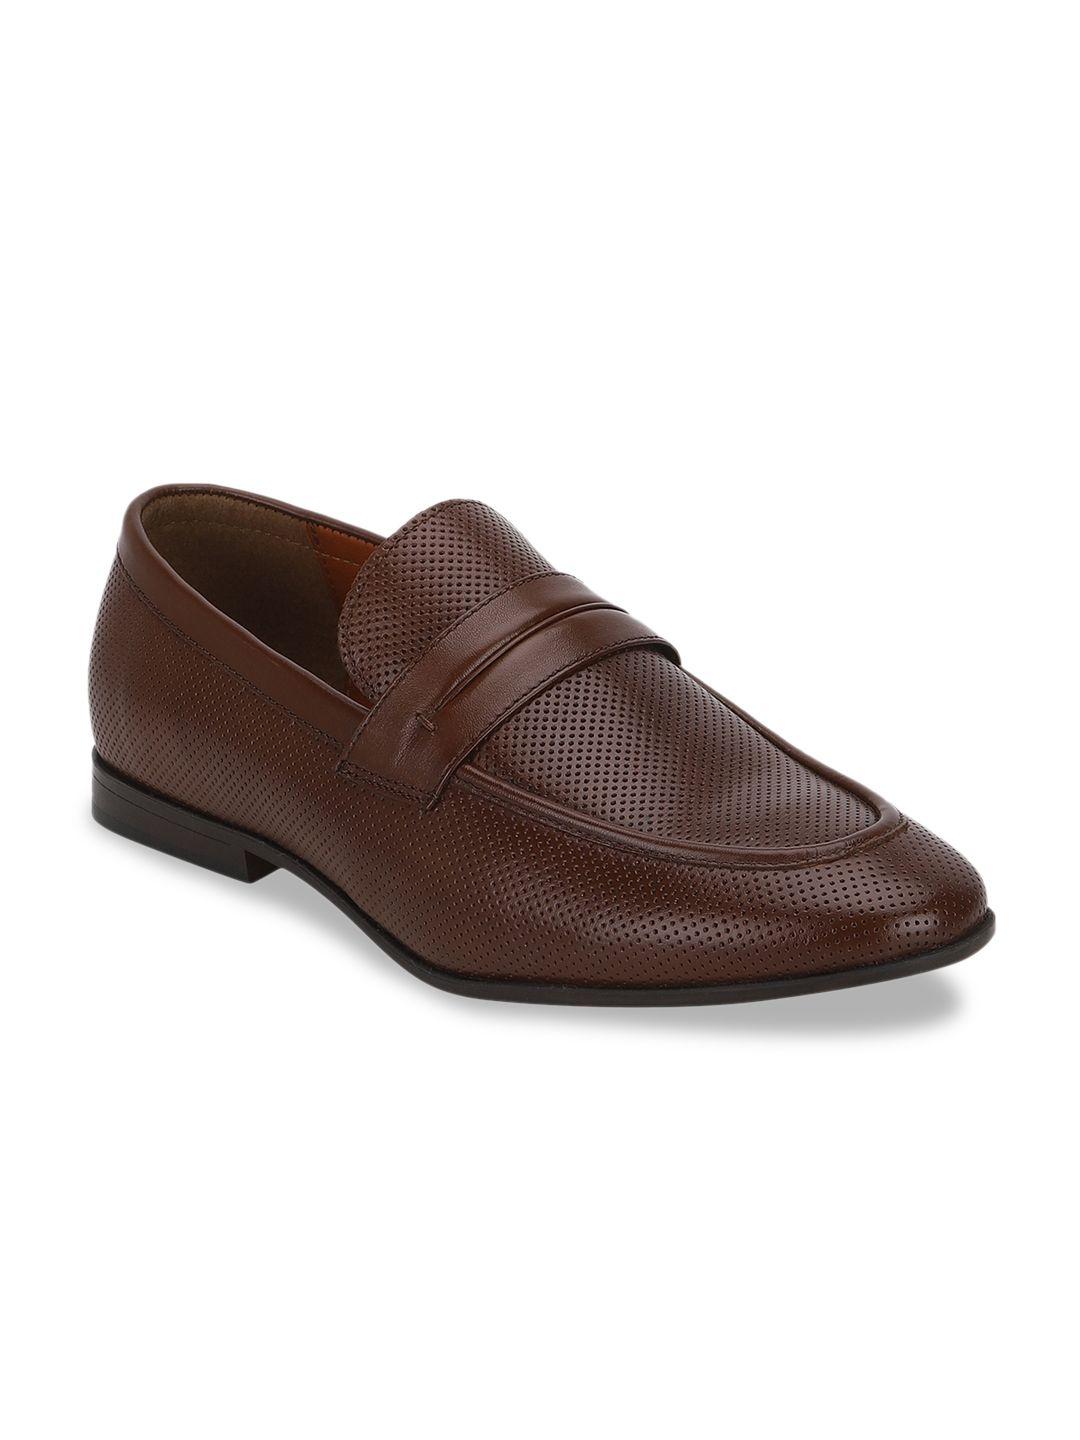 red tape men brown solid leather formal loafers